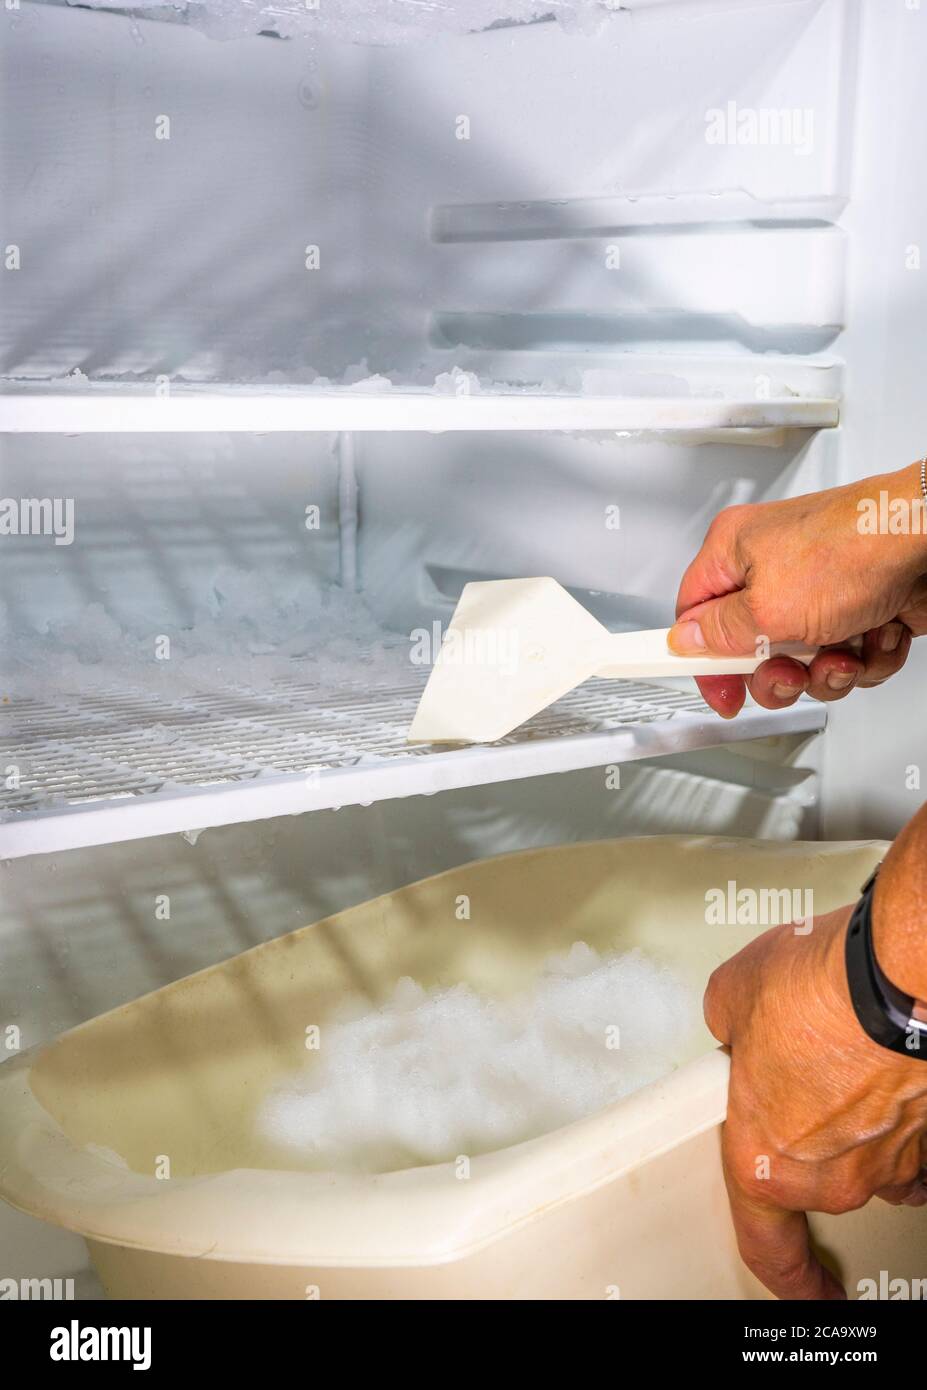 https://c8.alamy.com/comp/2CA9XW9/womans-hands-using-a-scraper-on-the-inside-of-a-domestic-freezer-to-remove-a-build-up-of-ice-and-frost-while-holding-a-plastic-bowl-to-catch-it-in-2CA9XW9.jpg